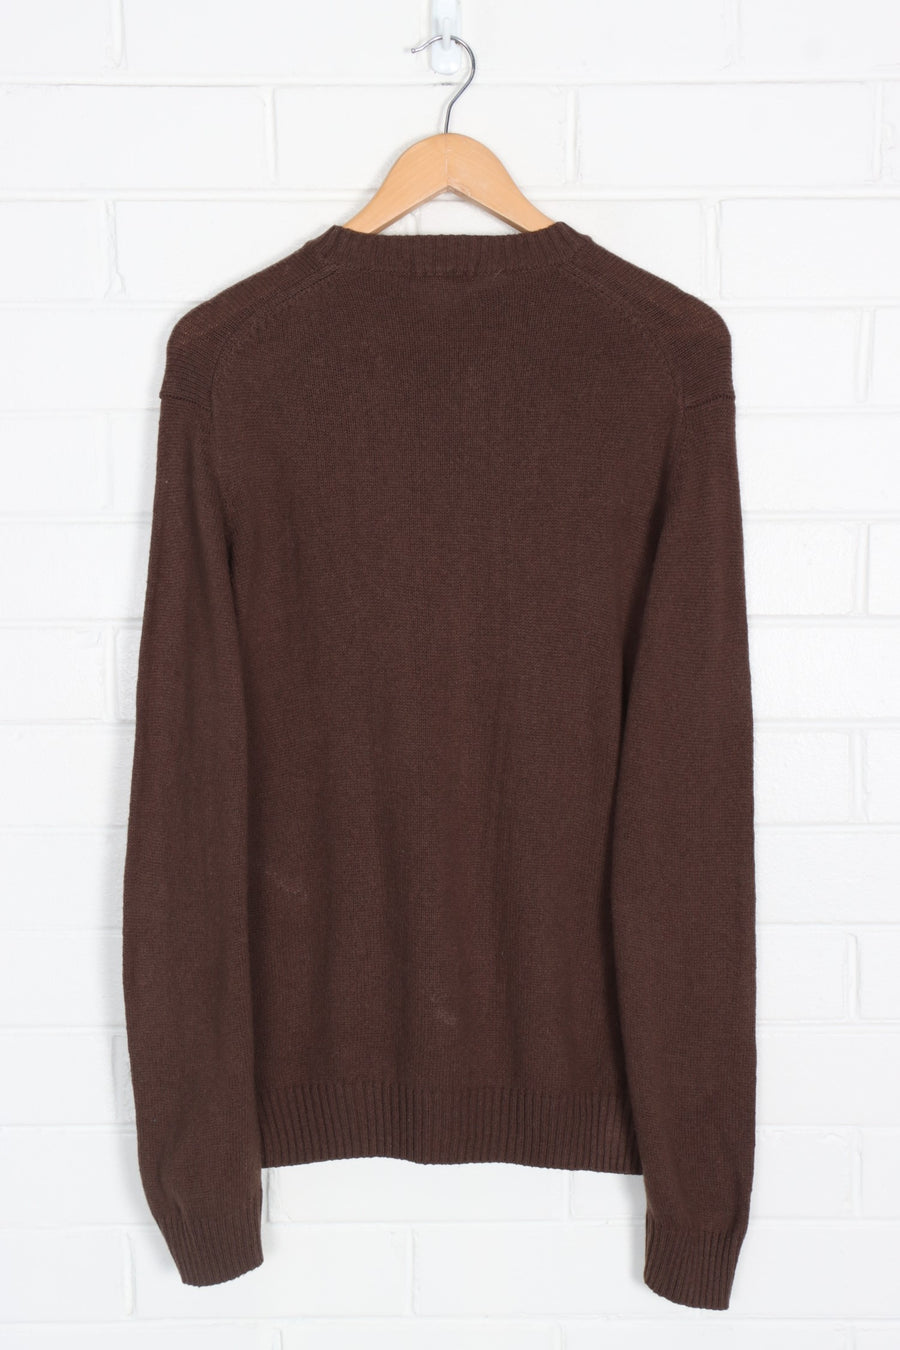 LACOTSE Brown Embroidered Knit (L)